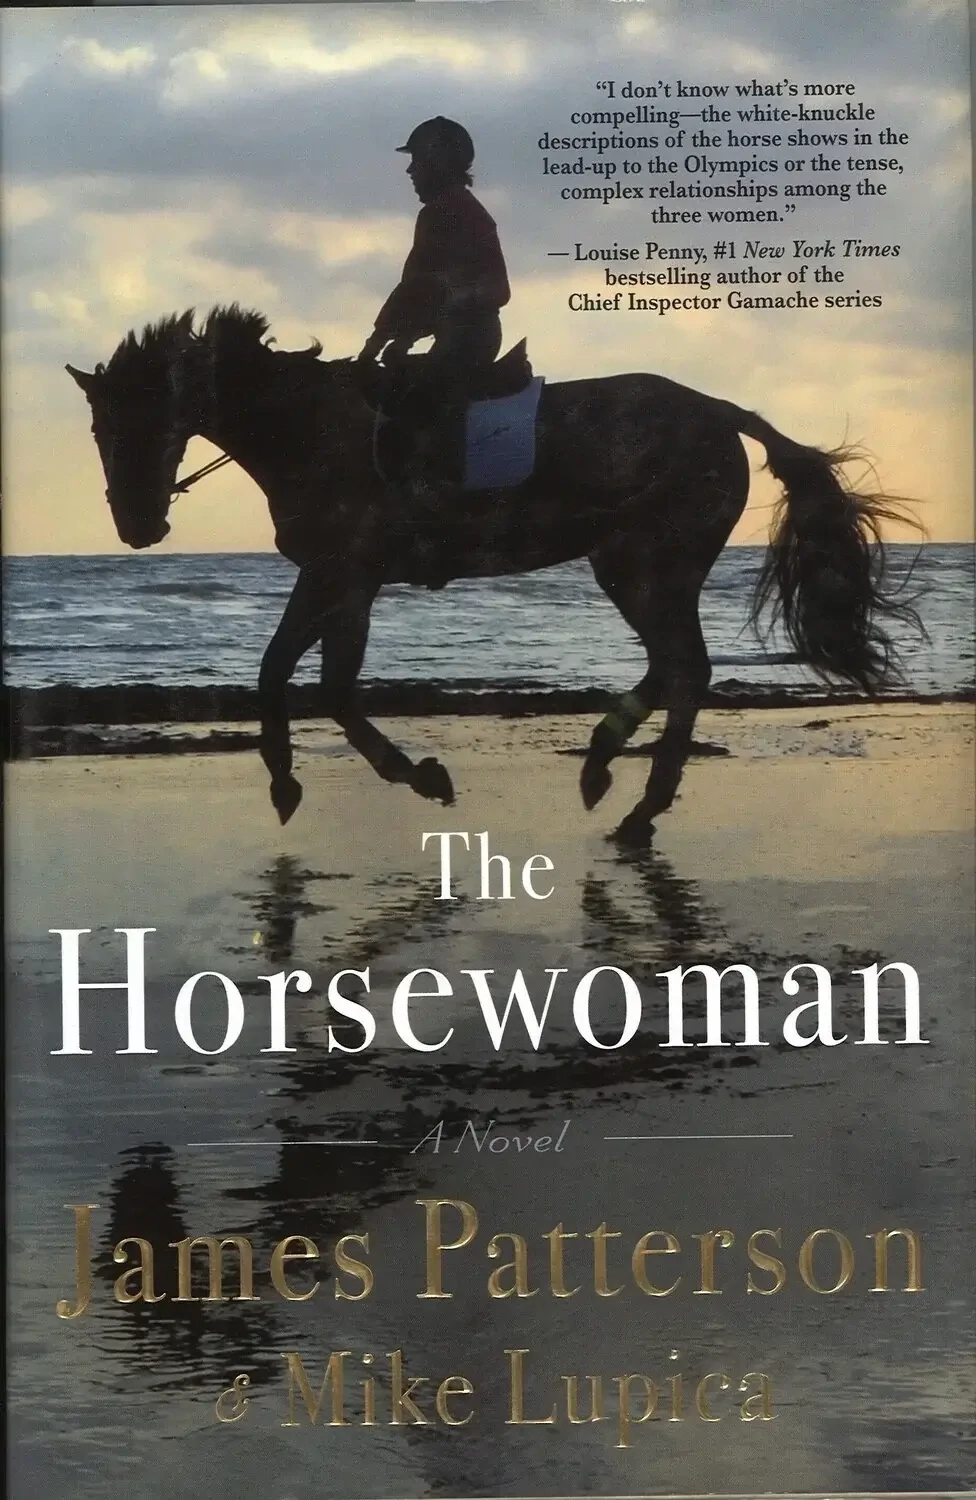 The Horsewoman by James Patterson,